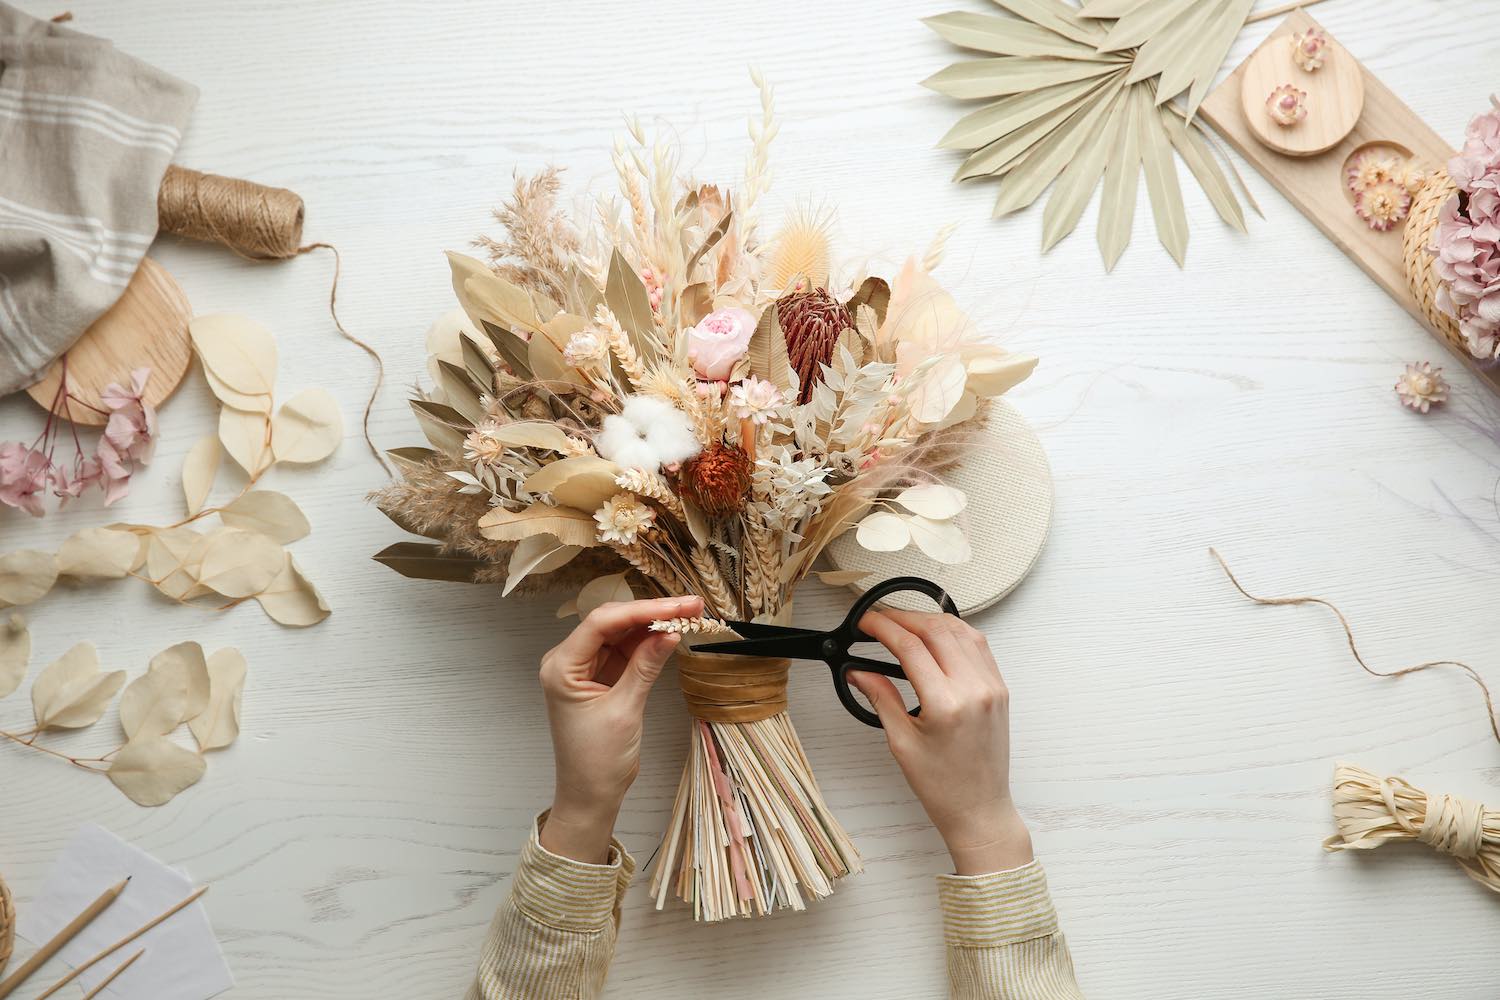 Making beautiful bouquet of dried flowers for fall